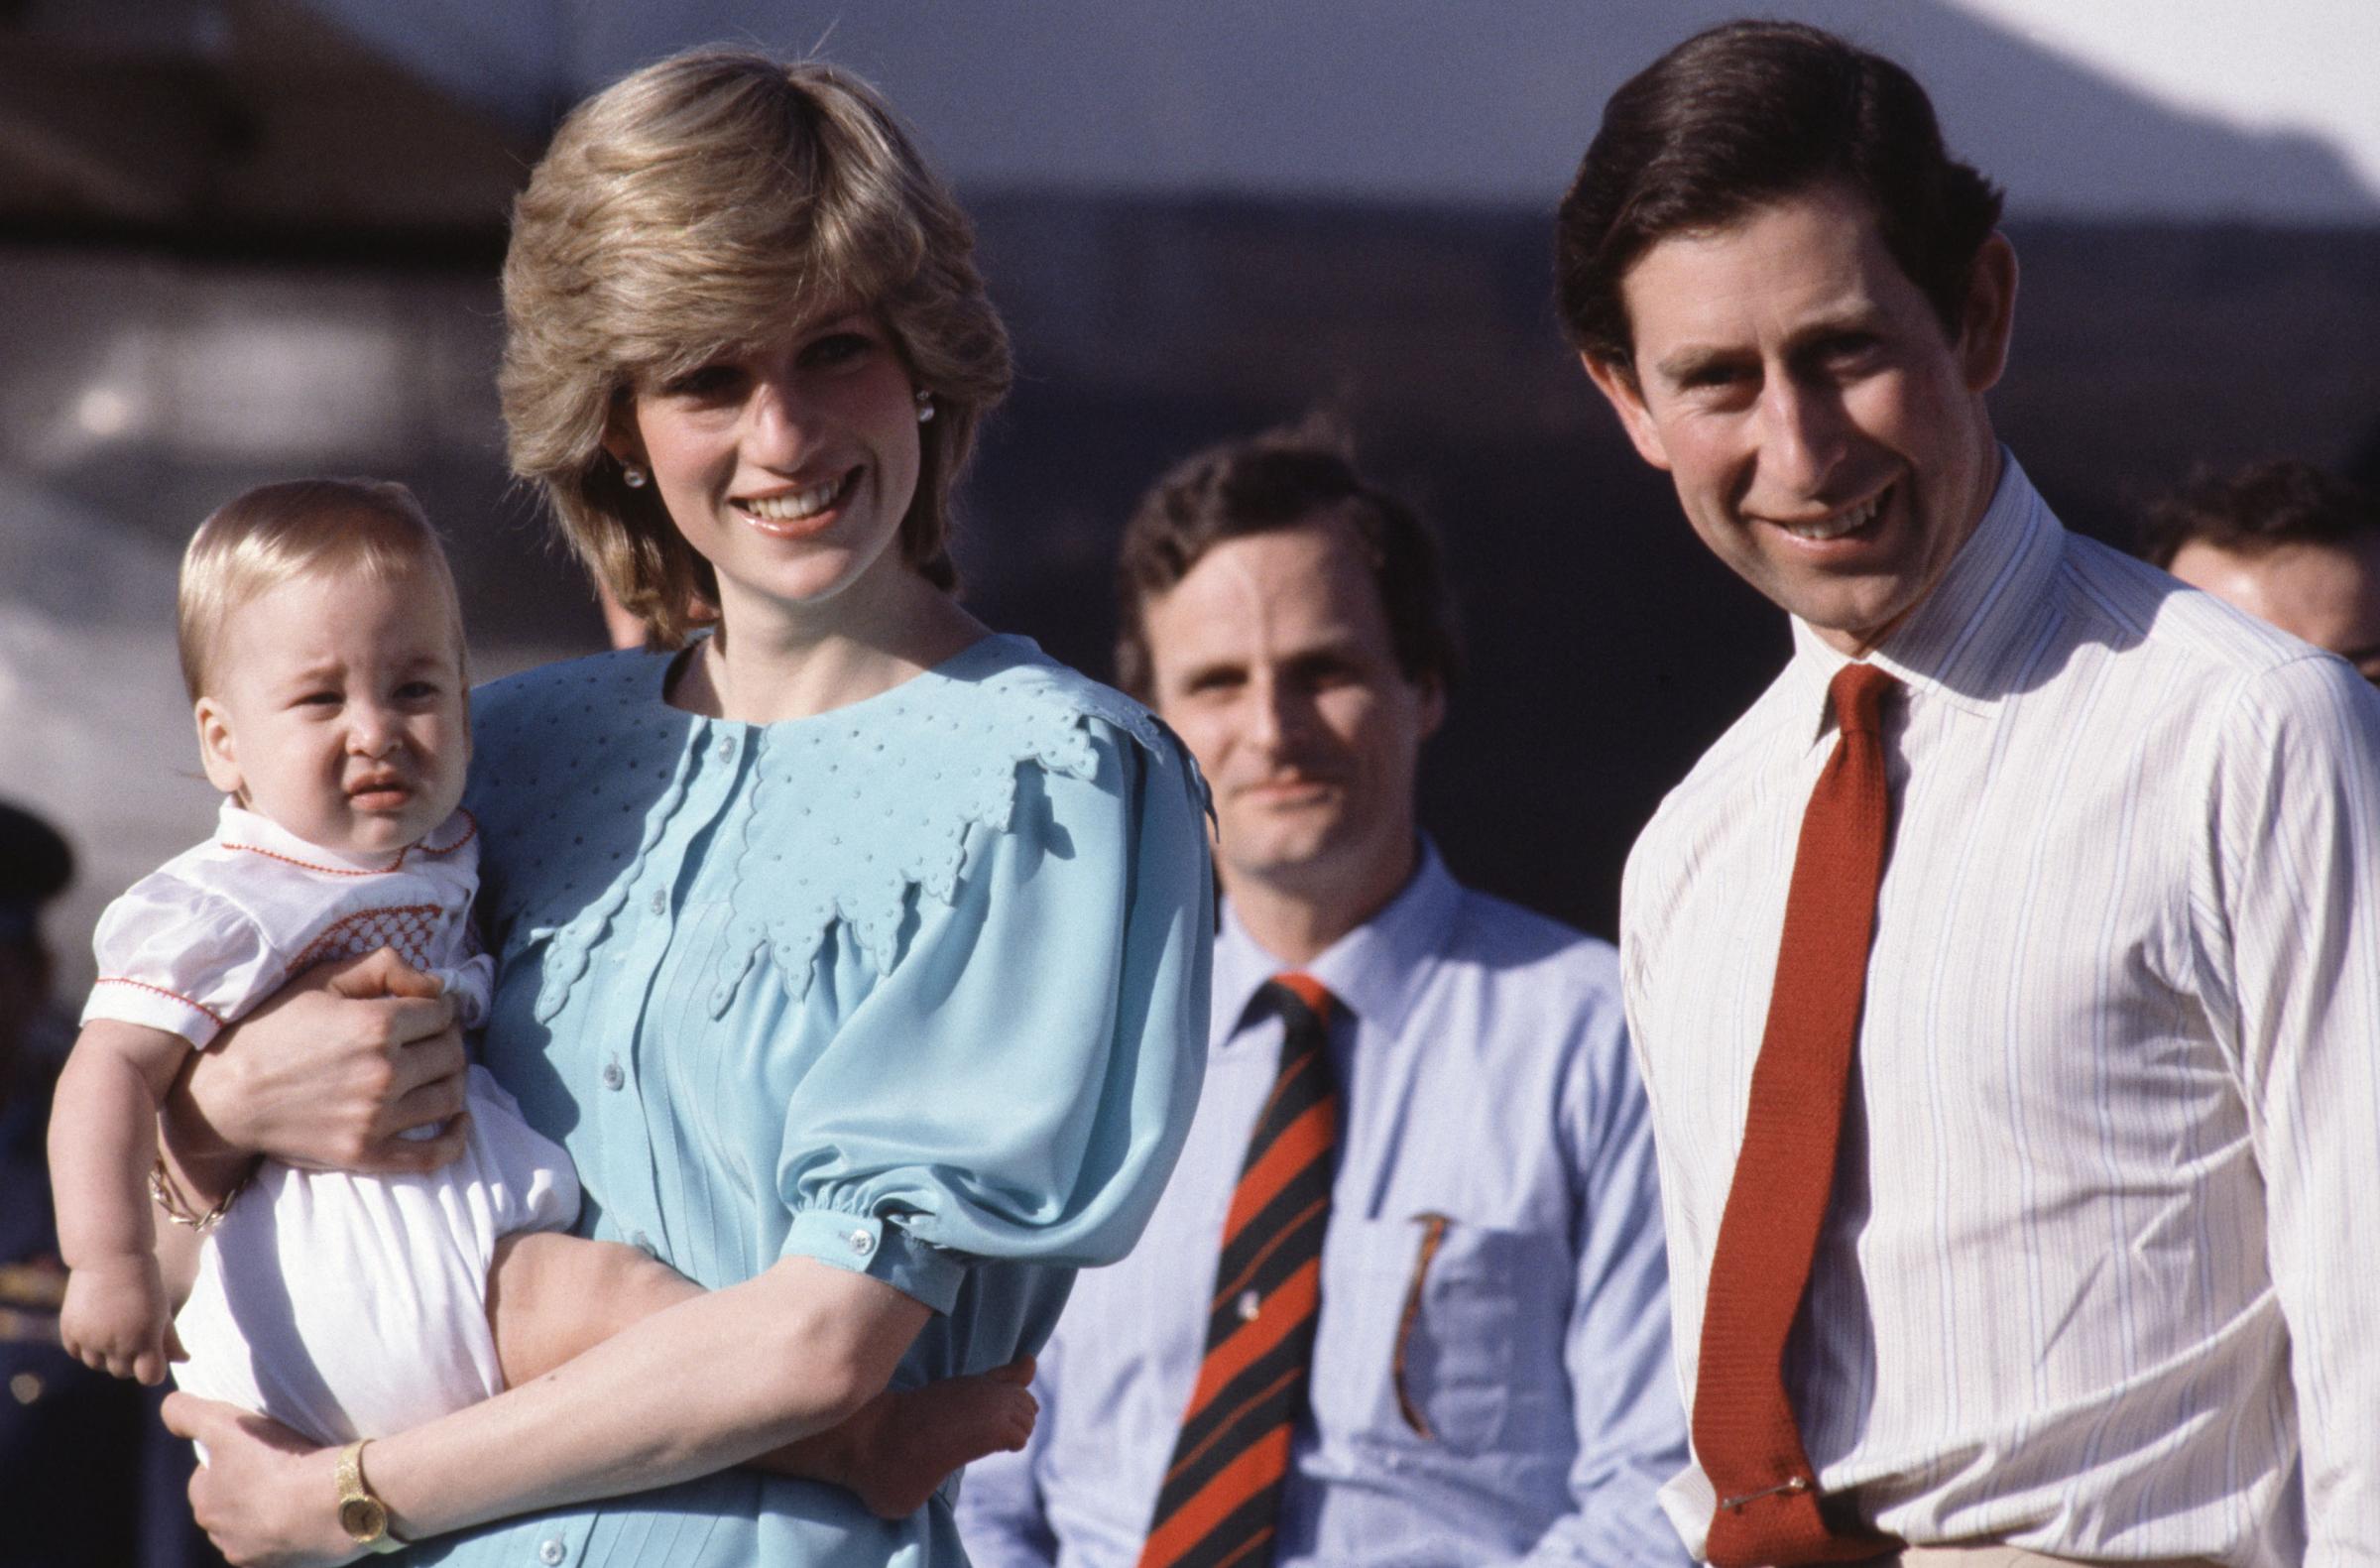 British Royalty. Tour of Australia. 20th March 1983. Alice Springs Airport. Prince Charles and Princess Diana arrive for their tour holding baby Prince William.